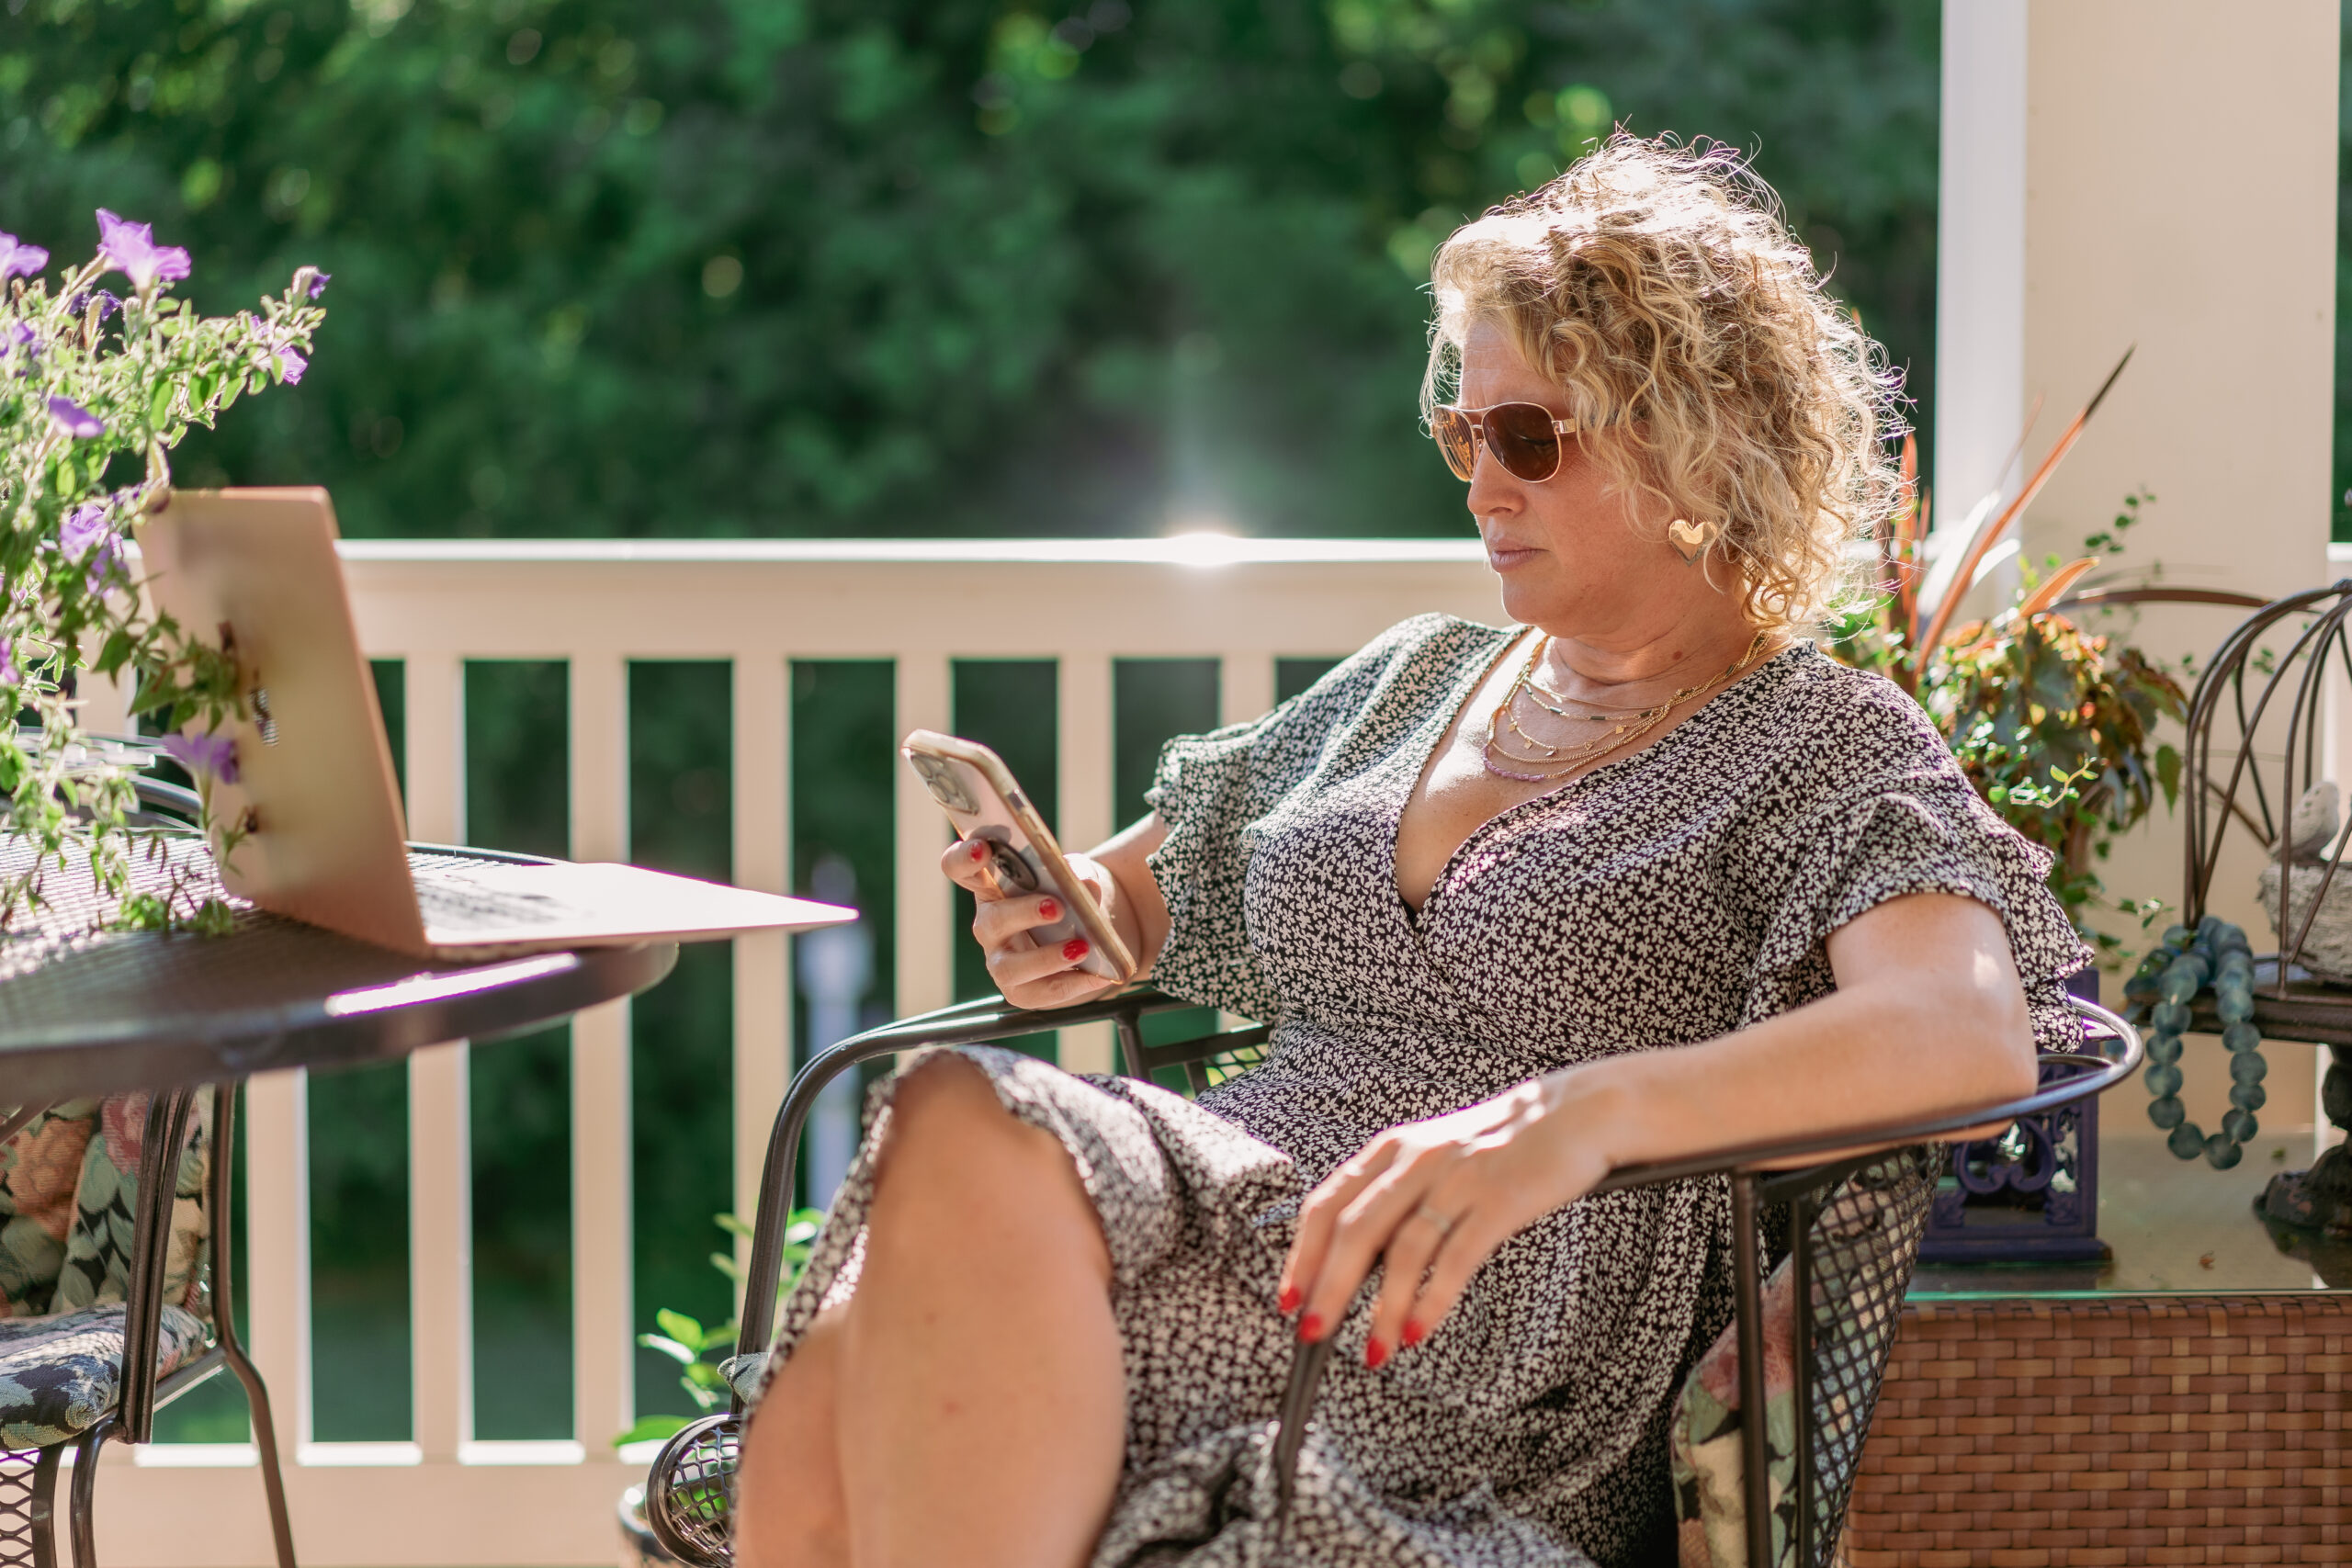 personal branding photo for realtors showing a female realtor sitting on her porch looking at her phone wearing a flowered dress and aviator sunglasses